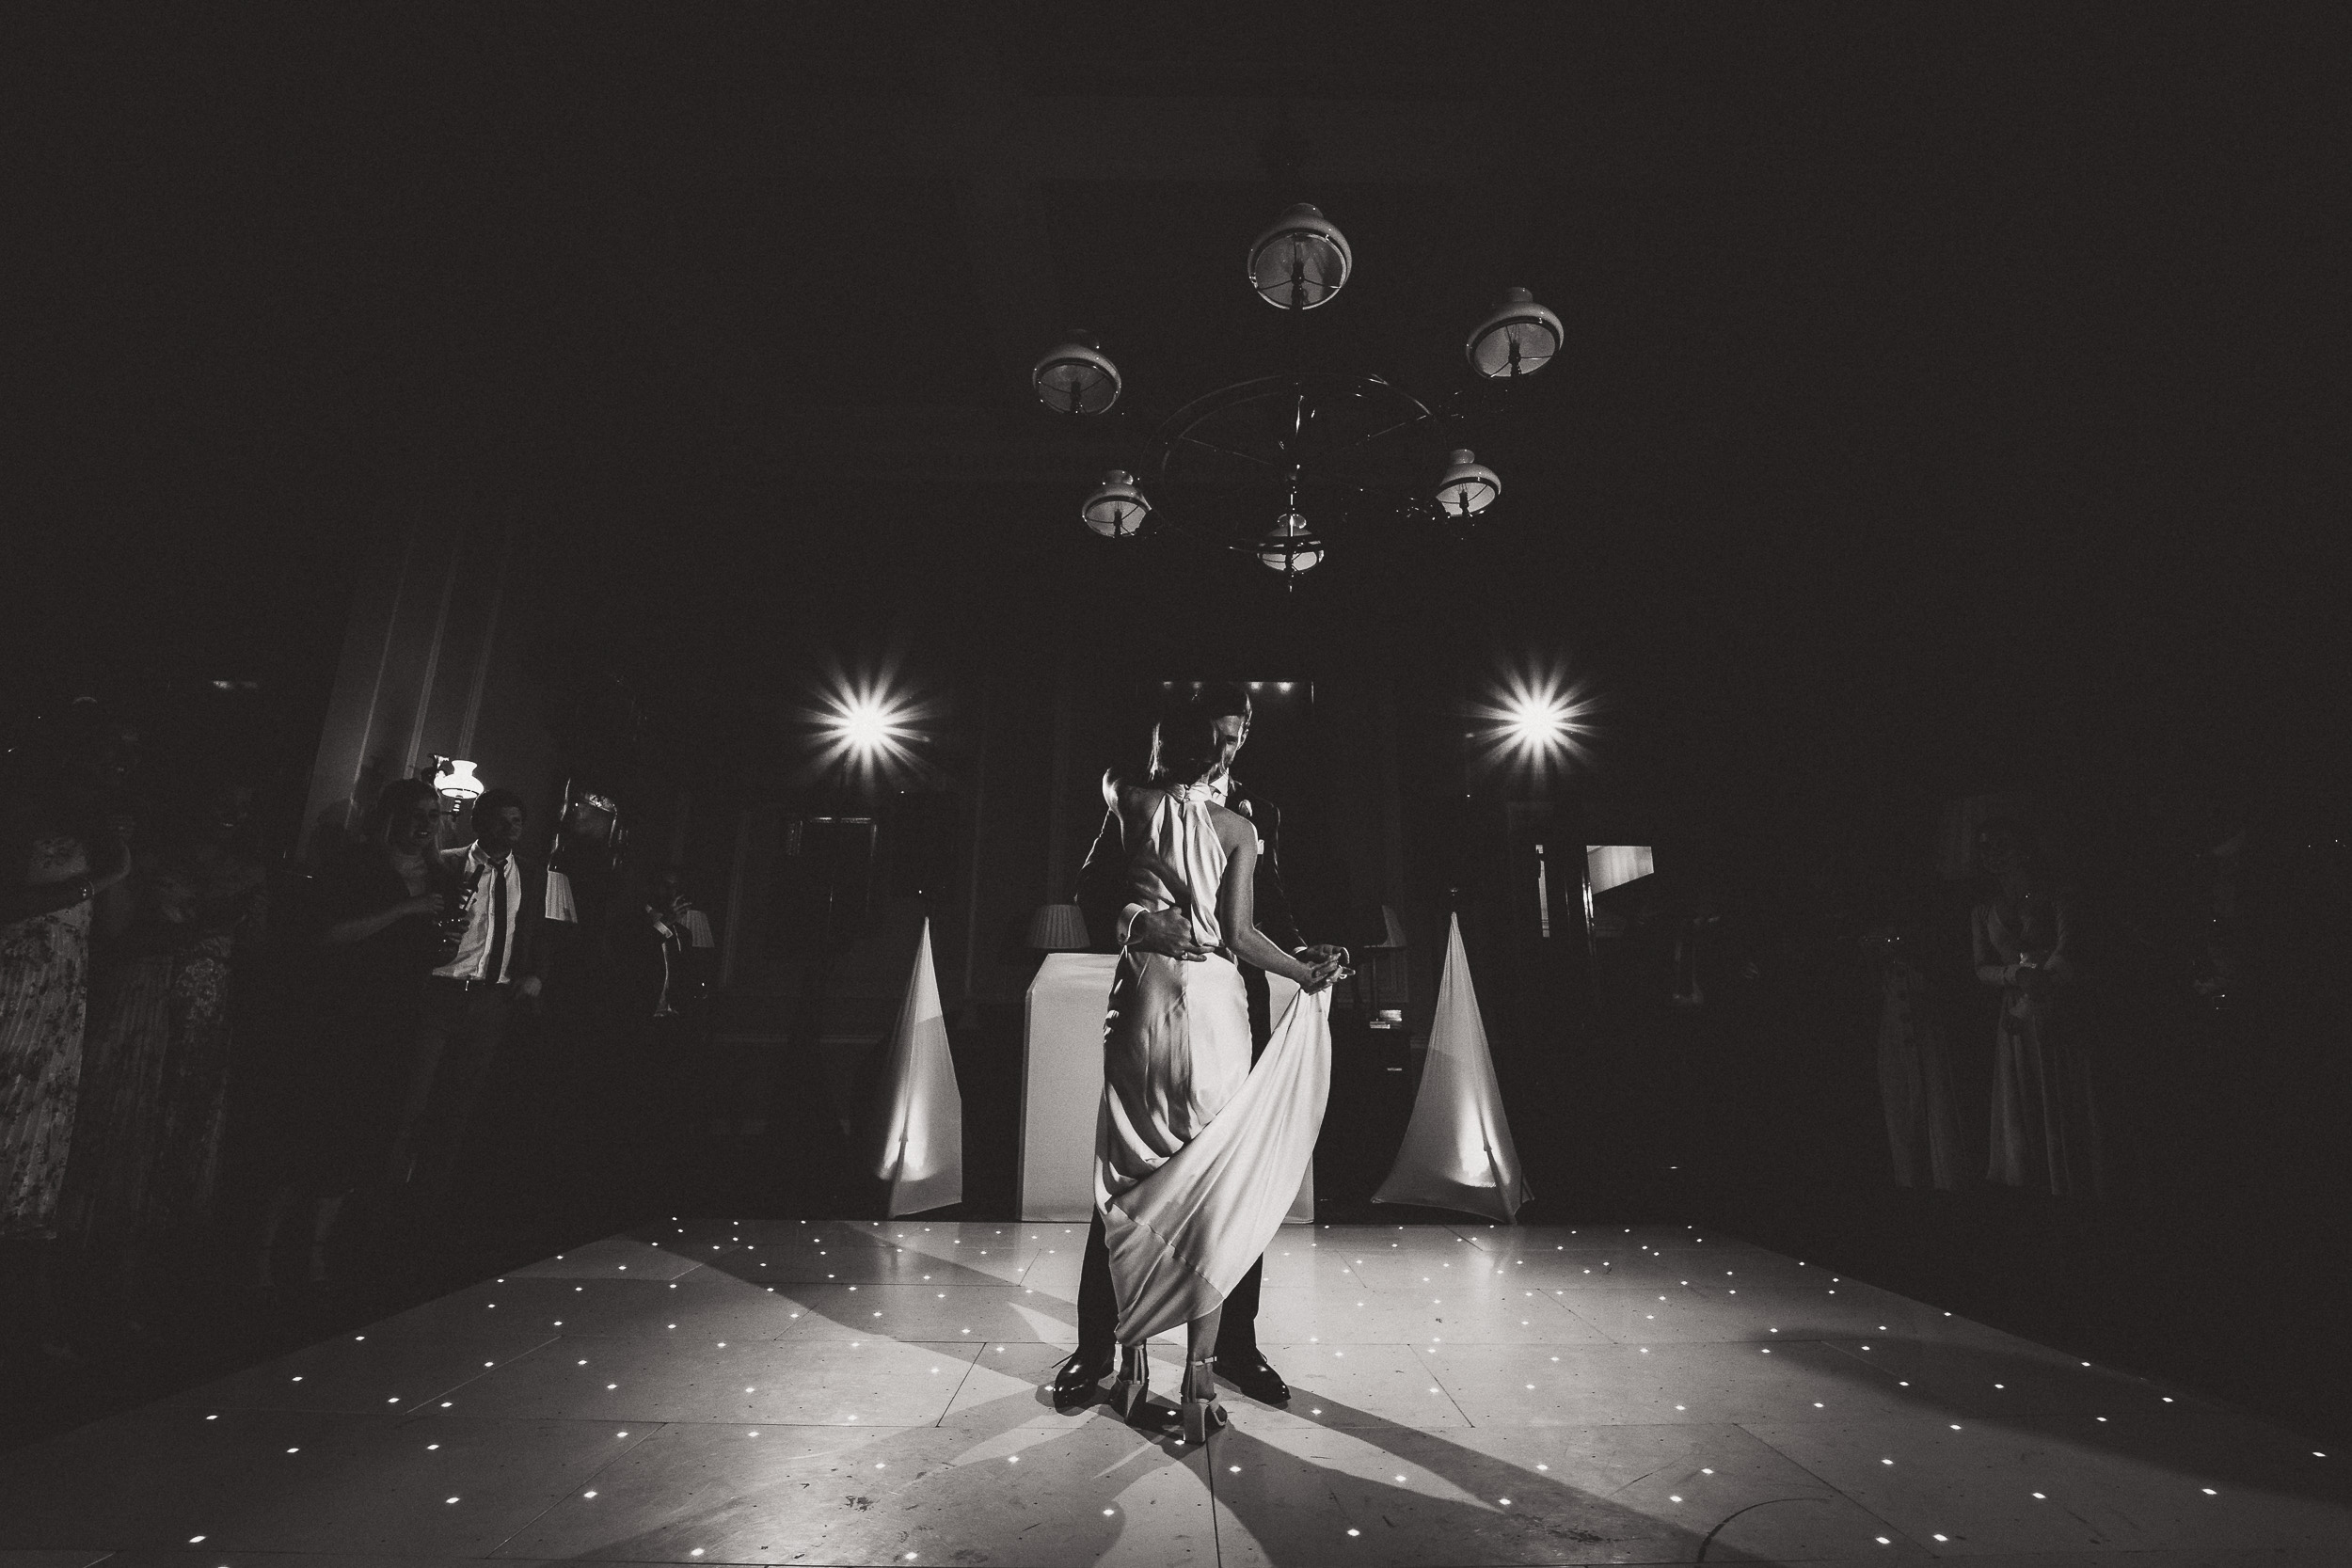 A wedding photo captures a black and white moment of a bride and groom dancing on the dance floor.